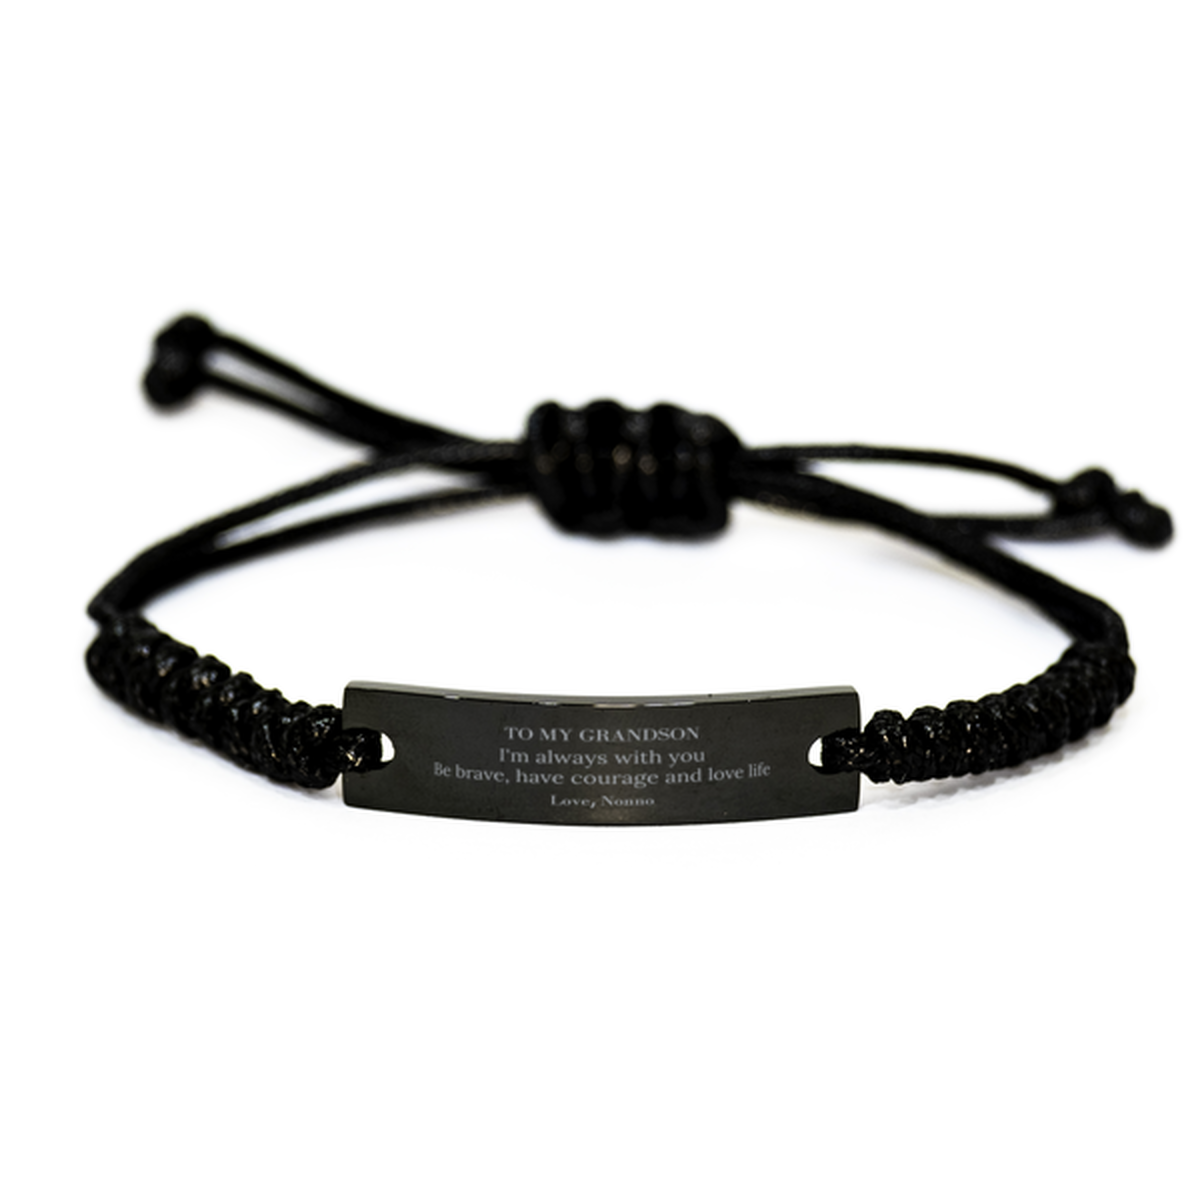 To My Grandson Gifts from Nonno, Unique Black Rope Bracelet Inspirational Christmas Birthday Graduation Gifts for Grandson I'm always with you. Be brave, have courage and love life. Love, Nonno